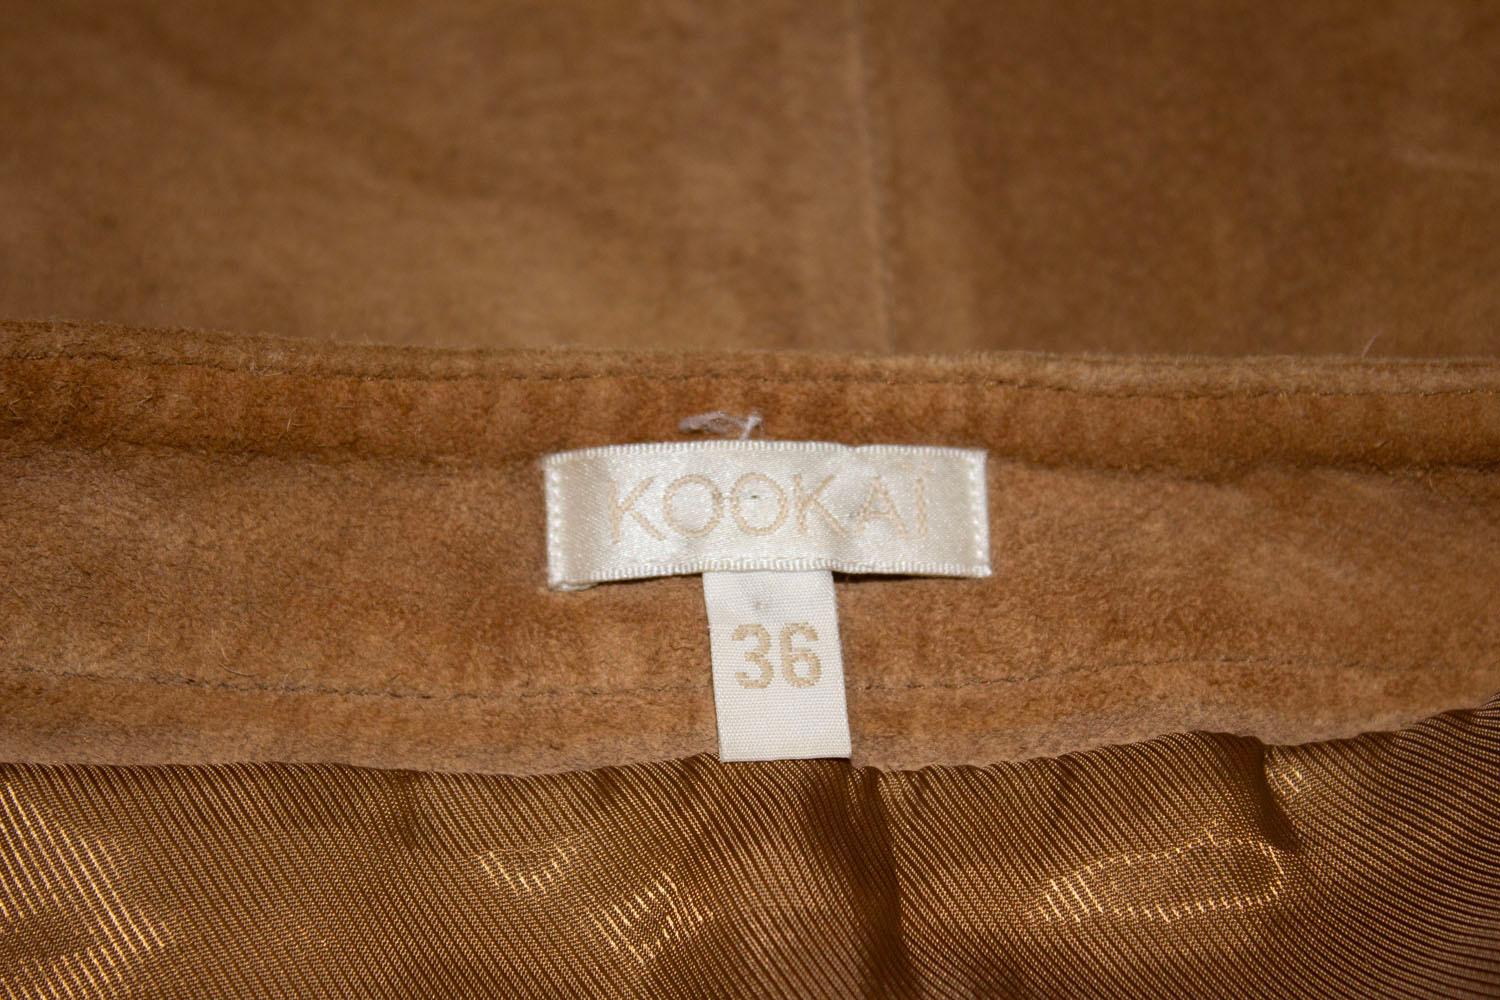 A great vintage suede skirt by French house Kookai. In a light tan colour the skirt has tie detail at the front plus two pockets , a side zip opening and is fully lined. 
Size 36, Measurement Waist 28'', length 23''